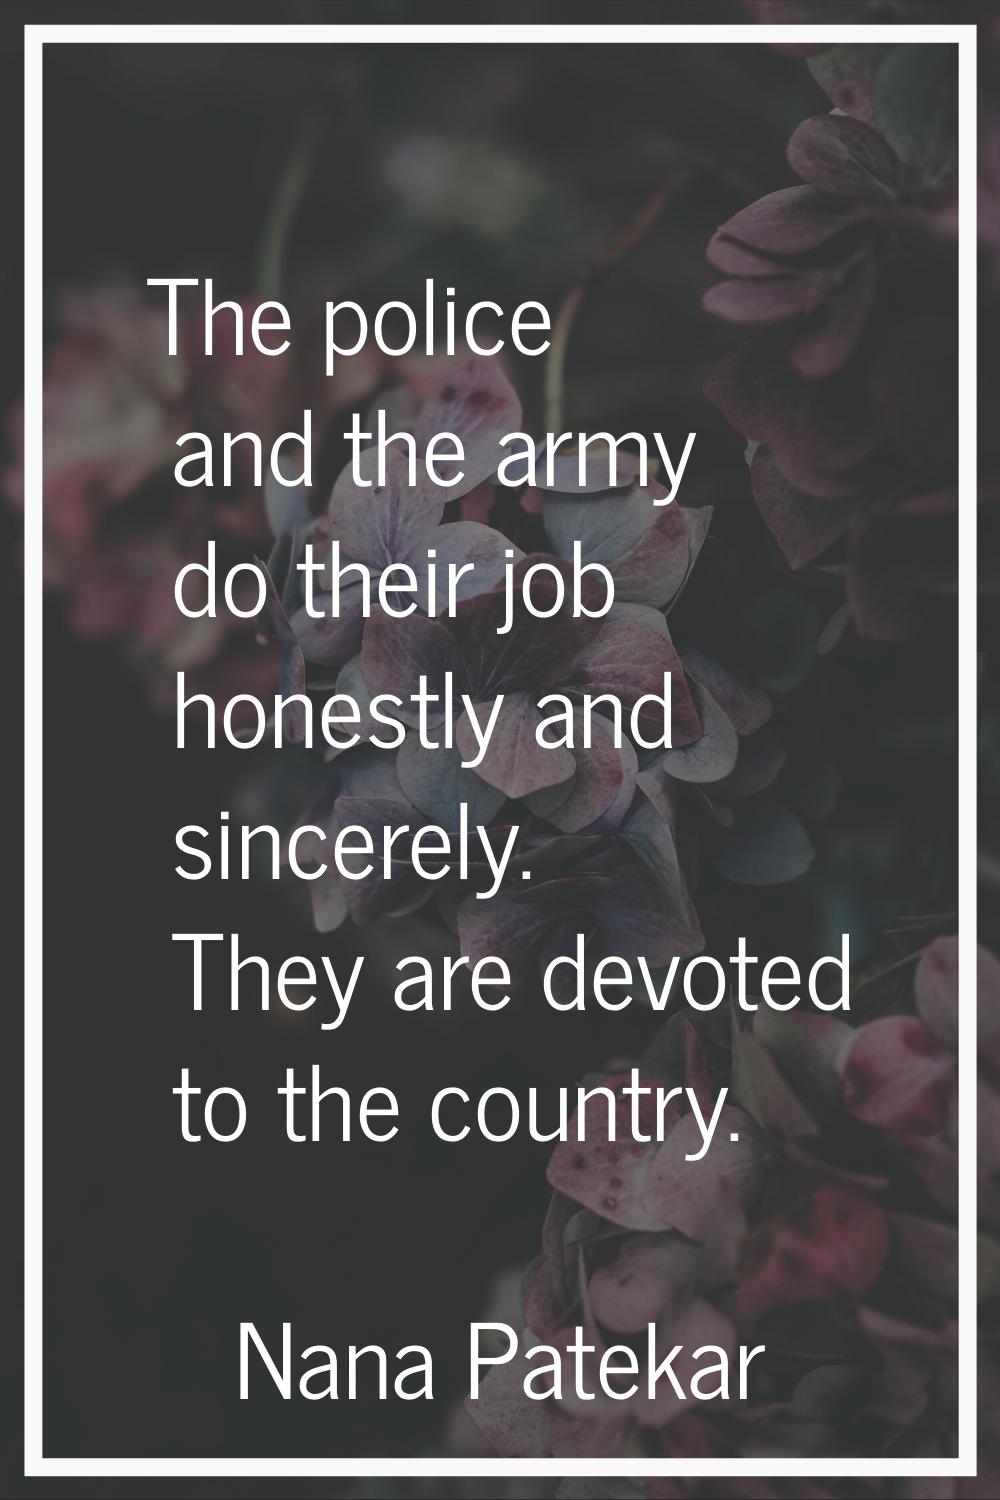 The police and the army do their job honestly and sincerely. They are devoted to the country.